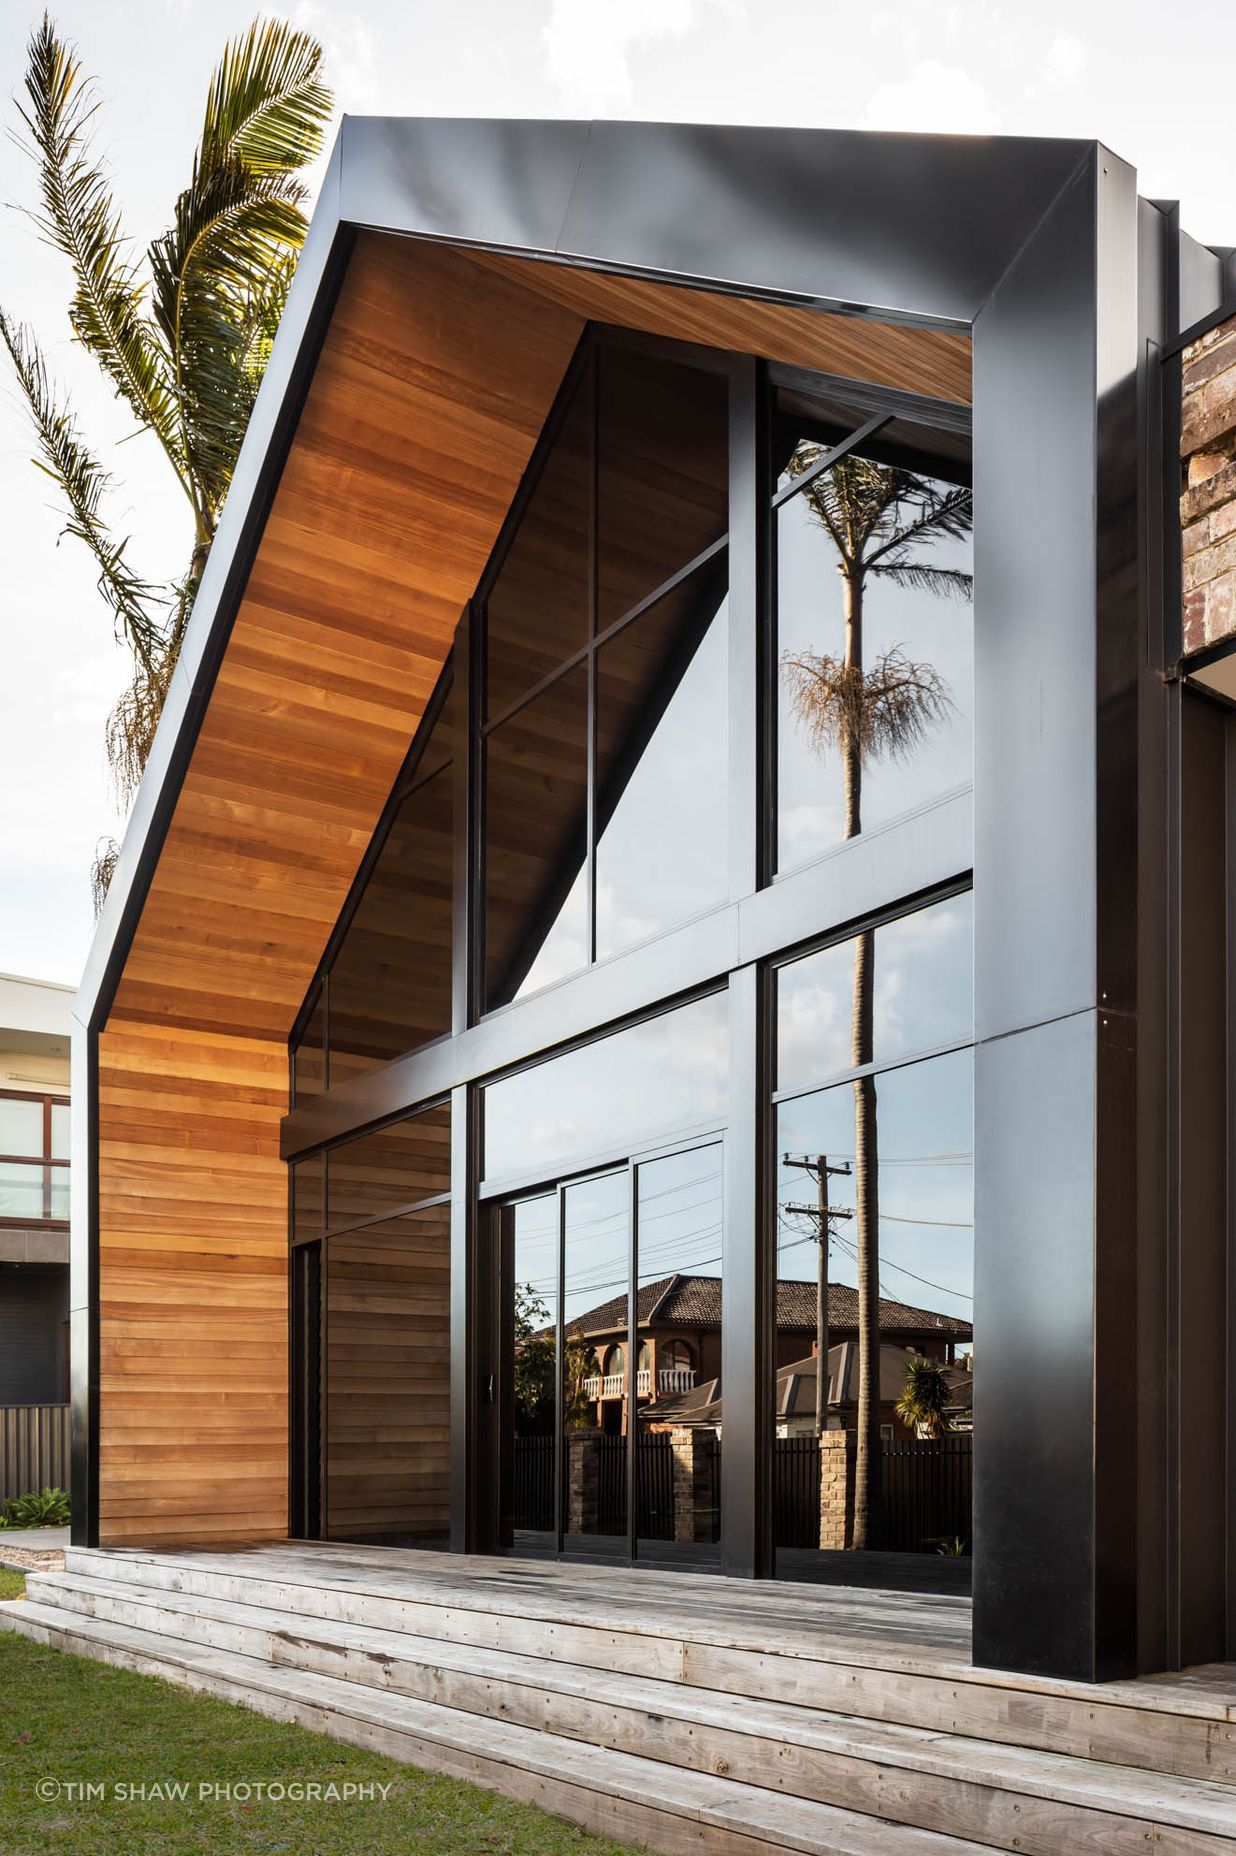 Timber warms and softens the strong lines of the facade.